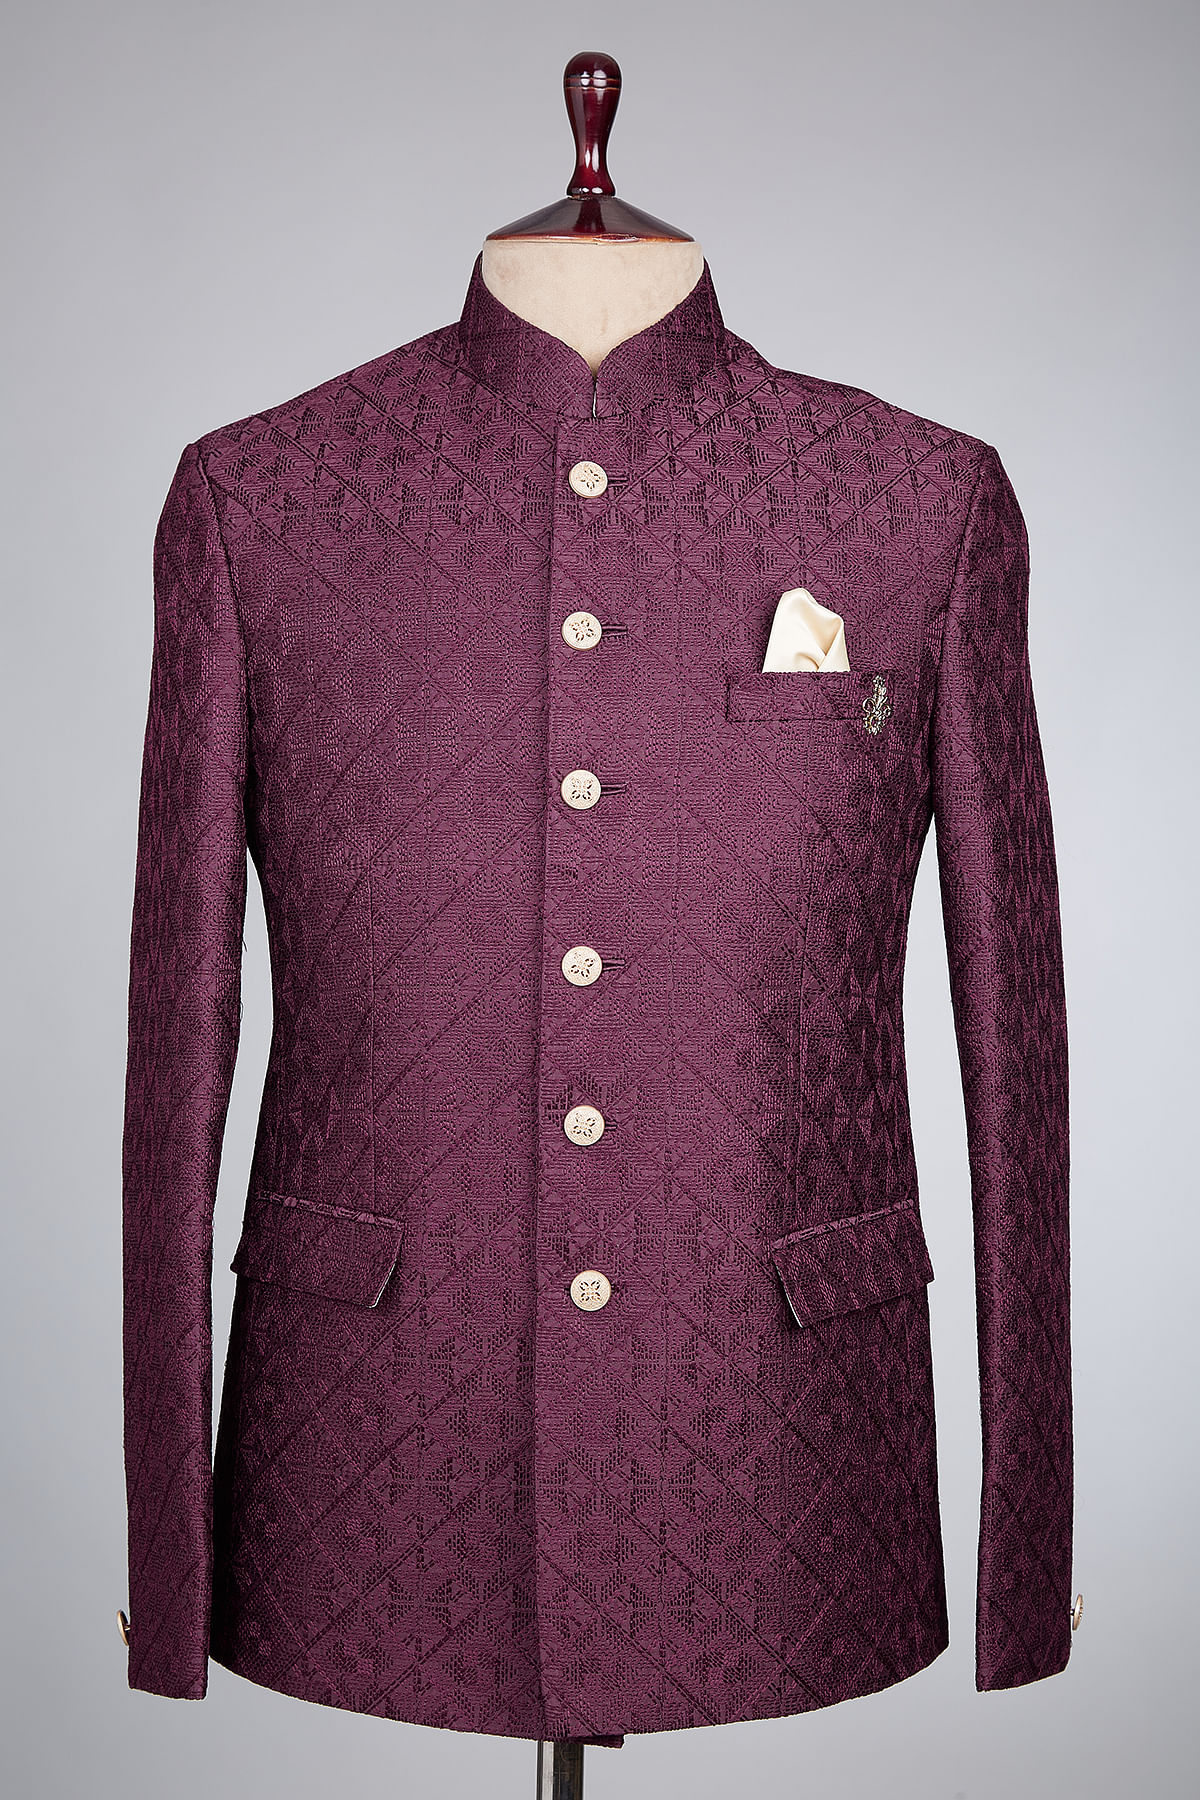 Buy Wine Color Jodhpuri Bandhgala Designer Blazer With White Trouser  Partywear for Grooms and Friends Wedding Functions Open Lawn Party Online  in India - Etsy